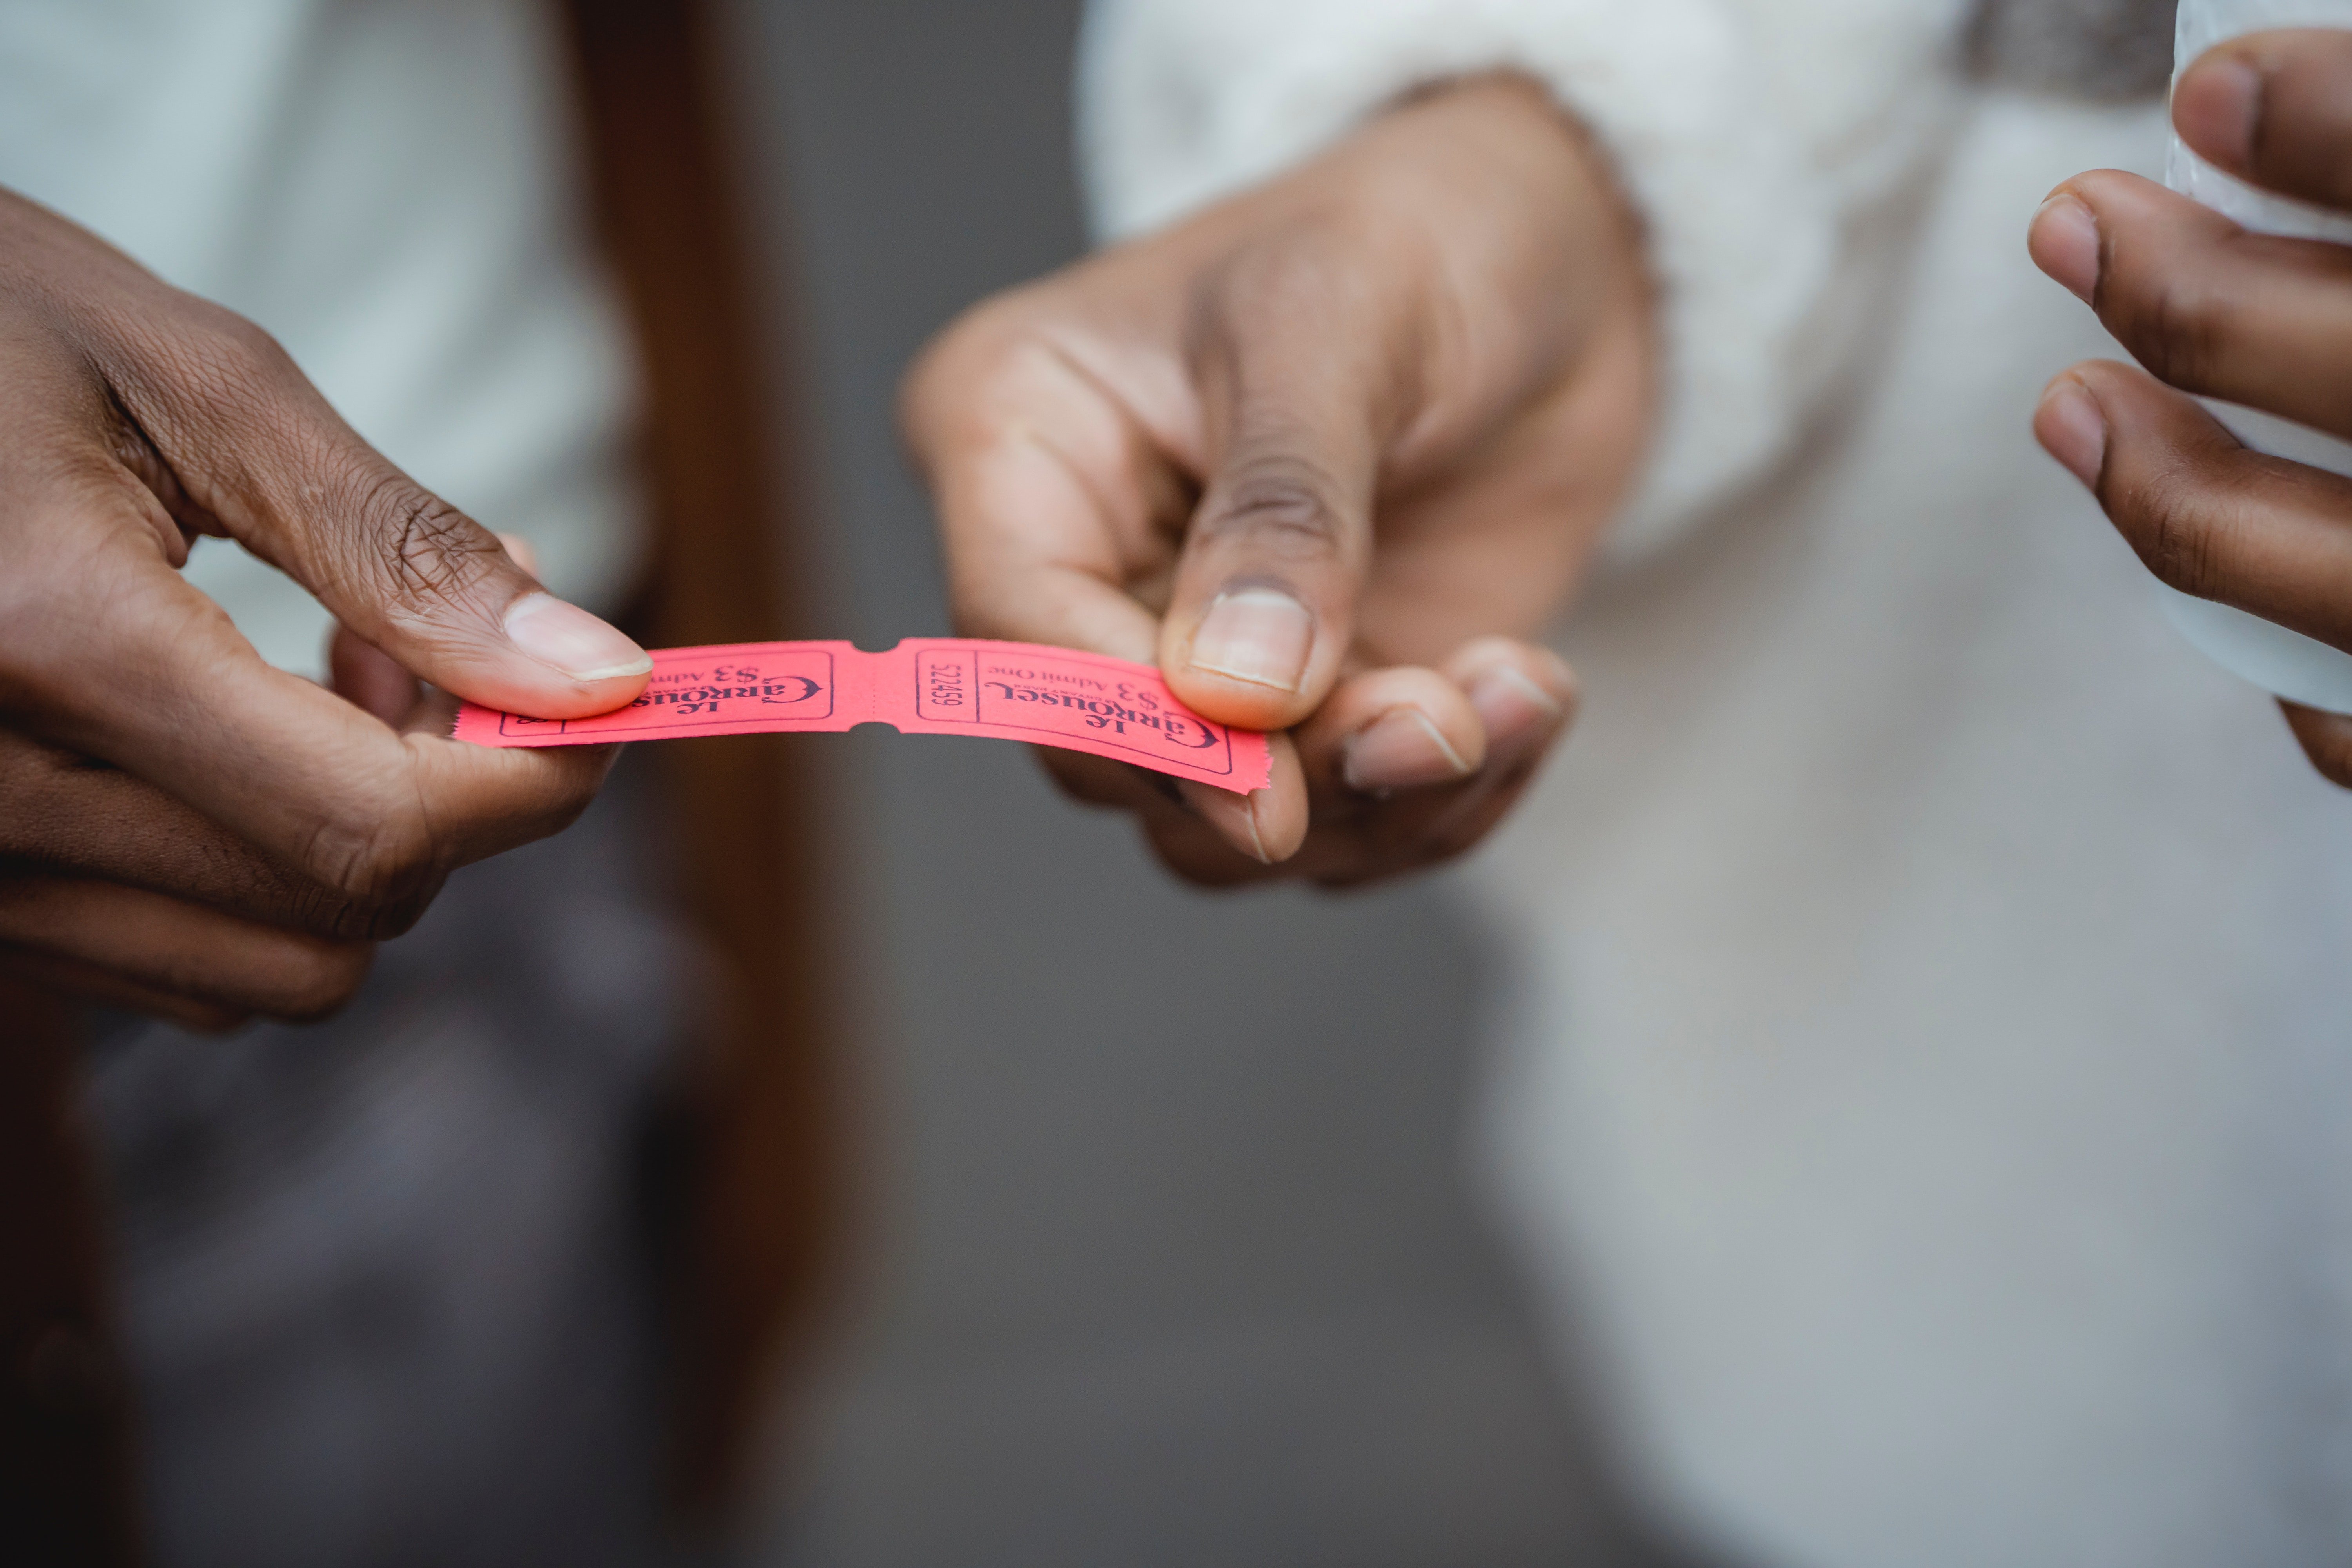 A red ticket in hands. | Source: Pexels